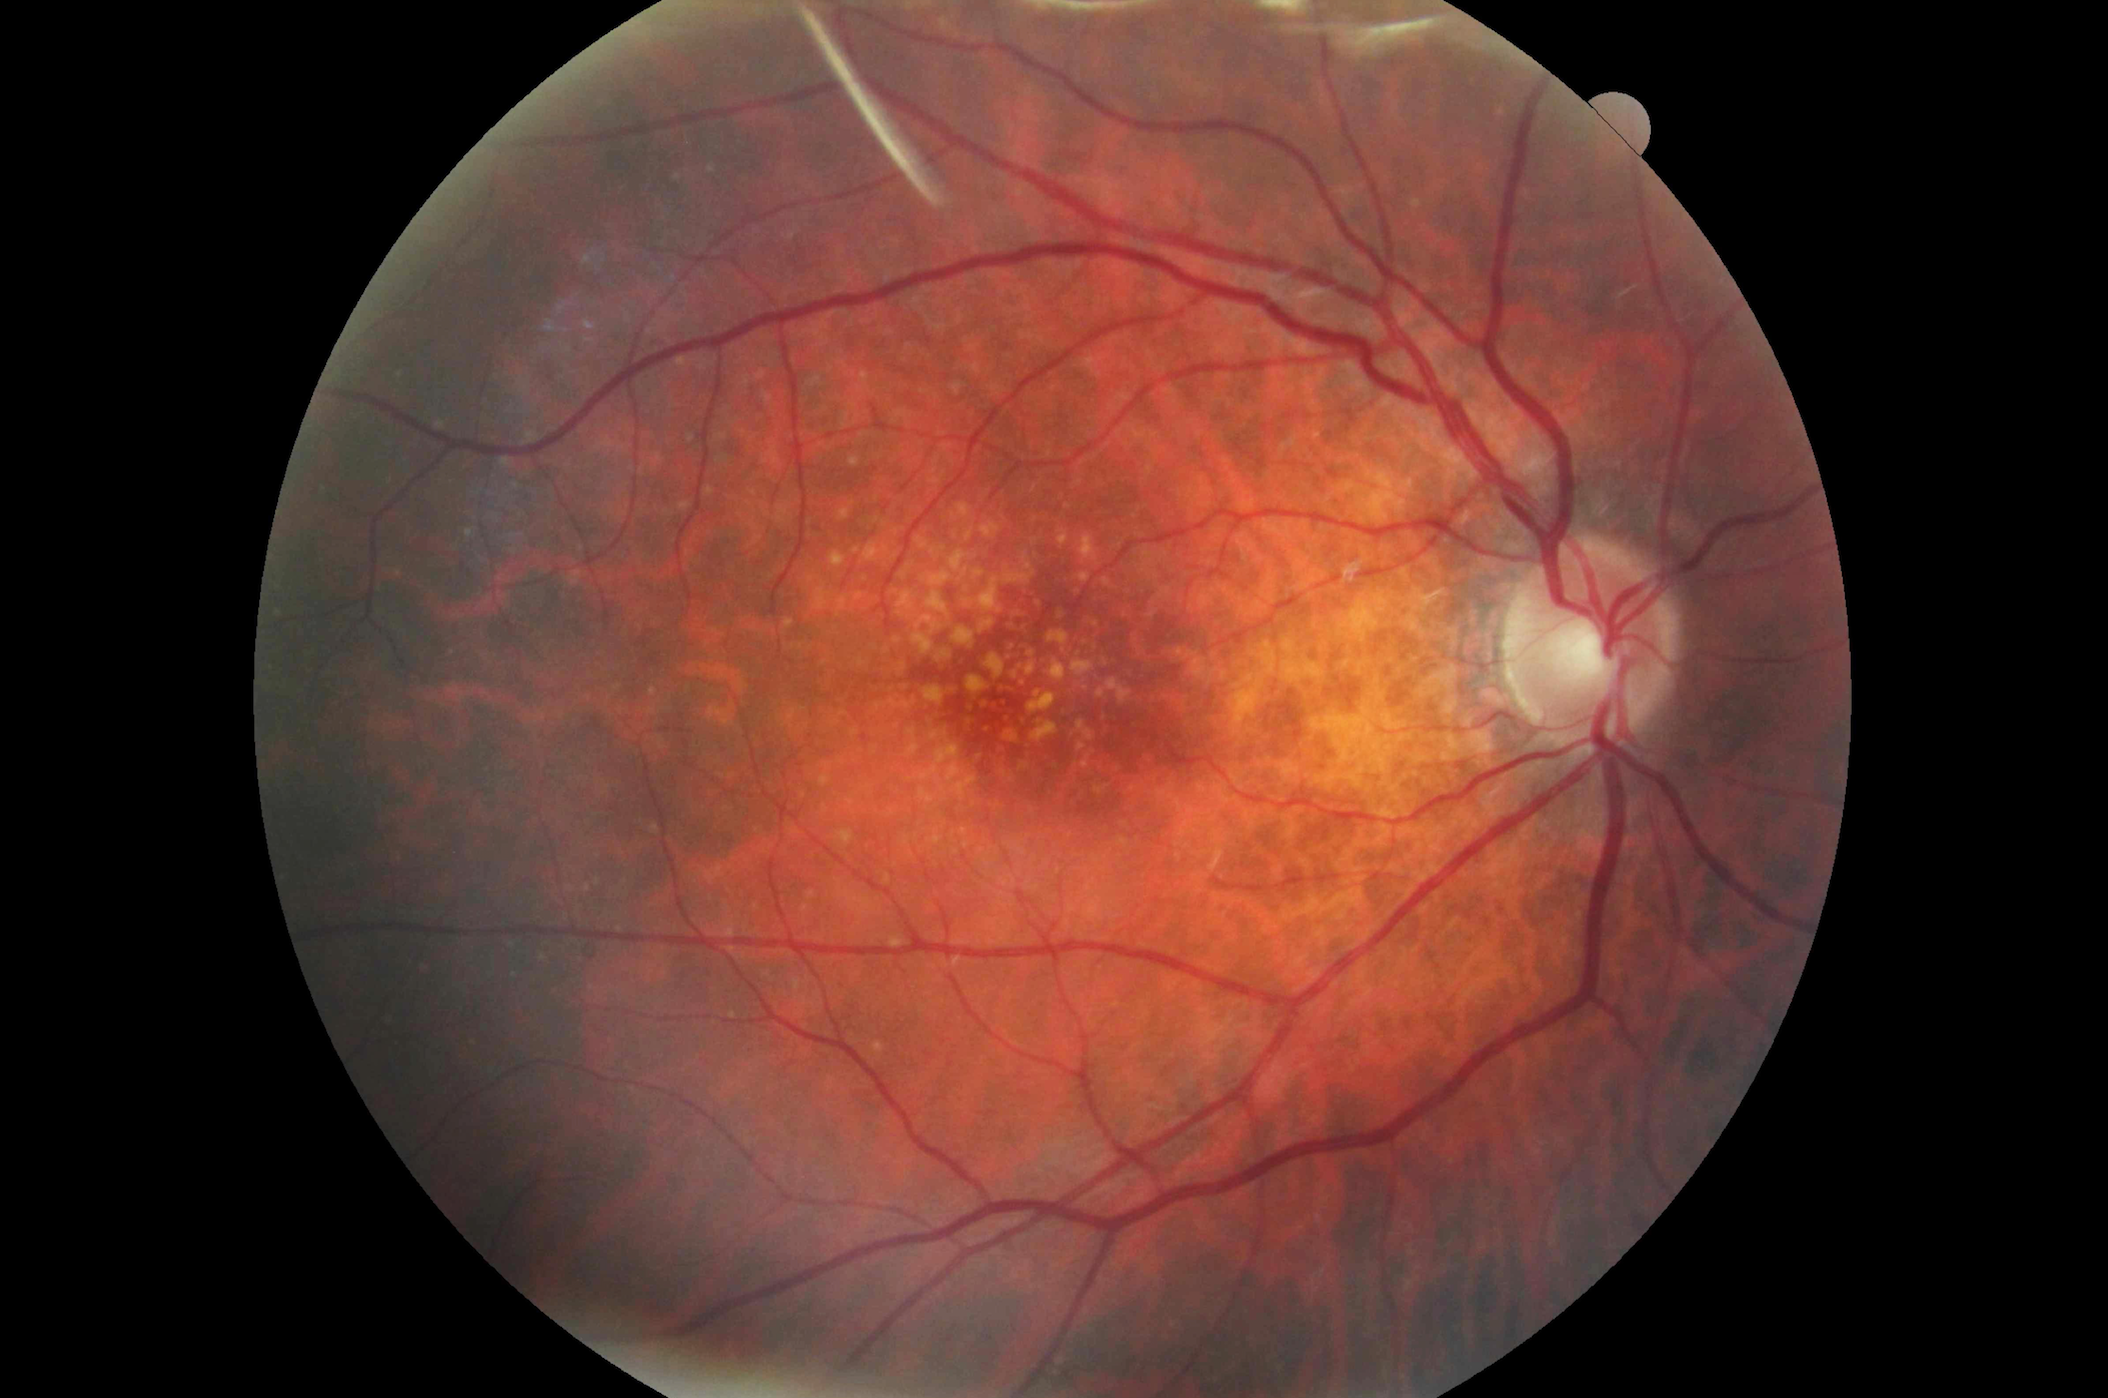 Why doctors are rethinking AMD standards